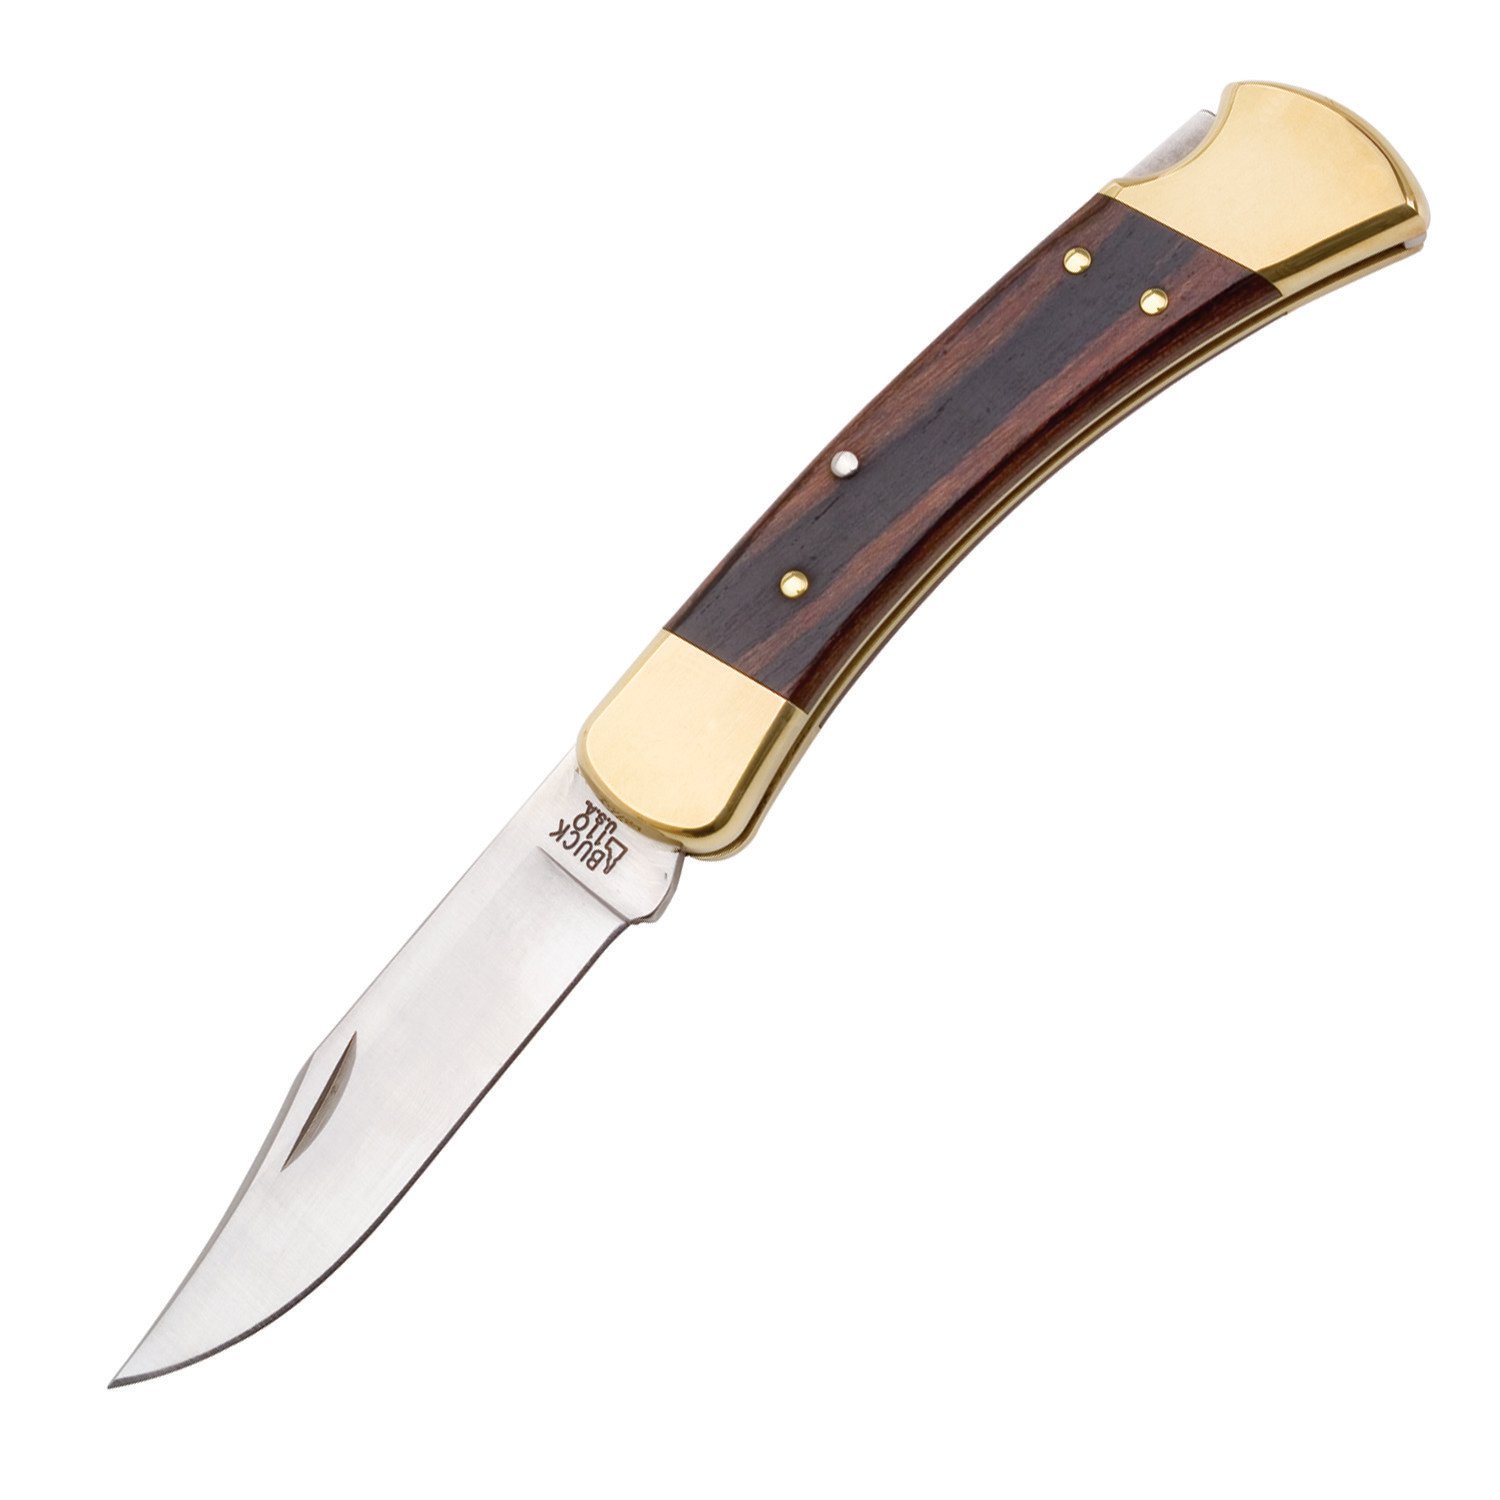 Camping Knife + Knives for Camping